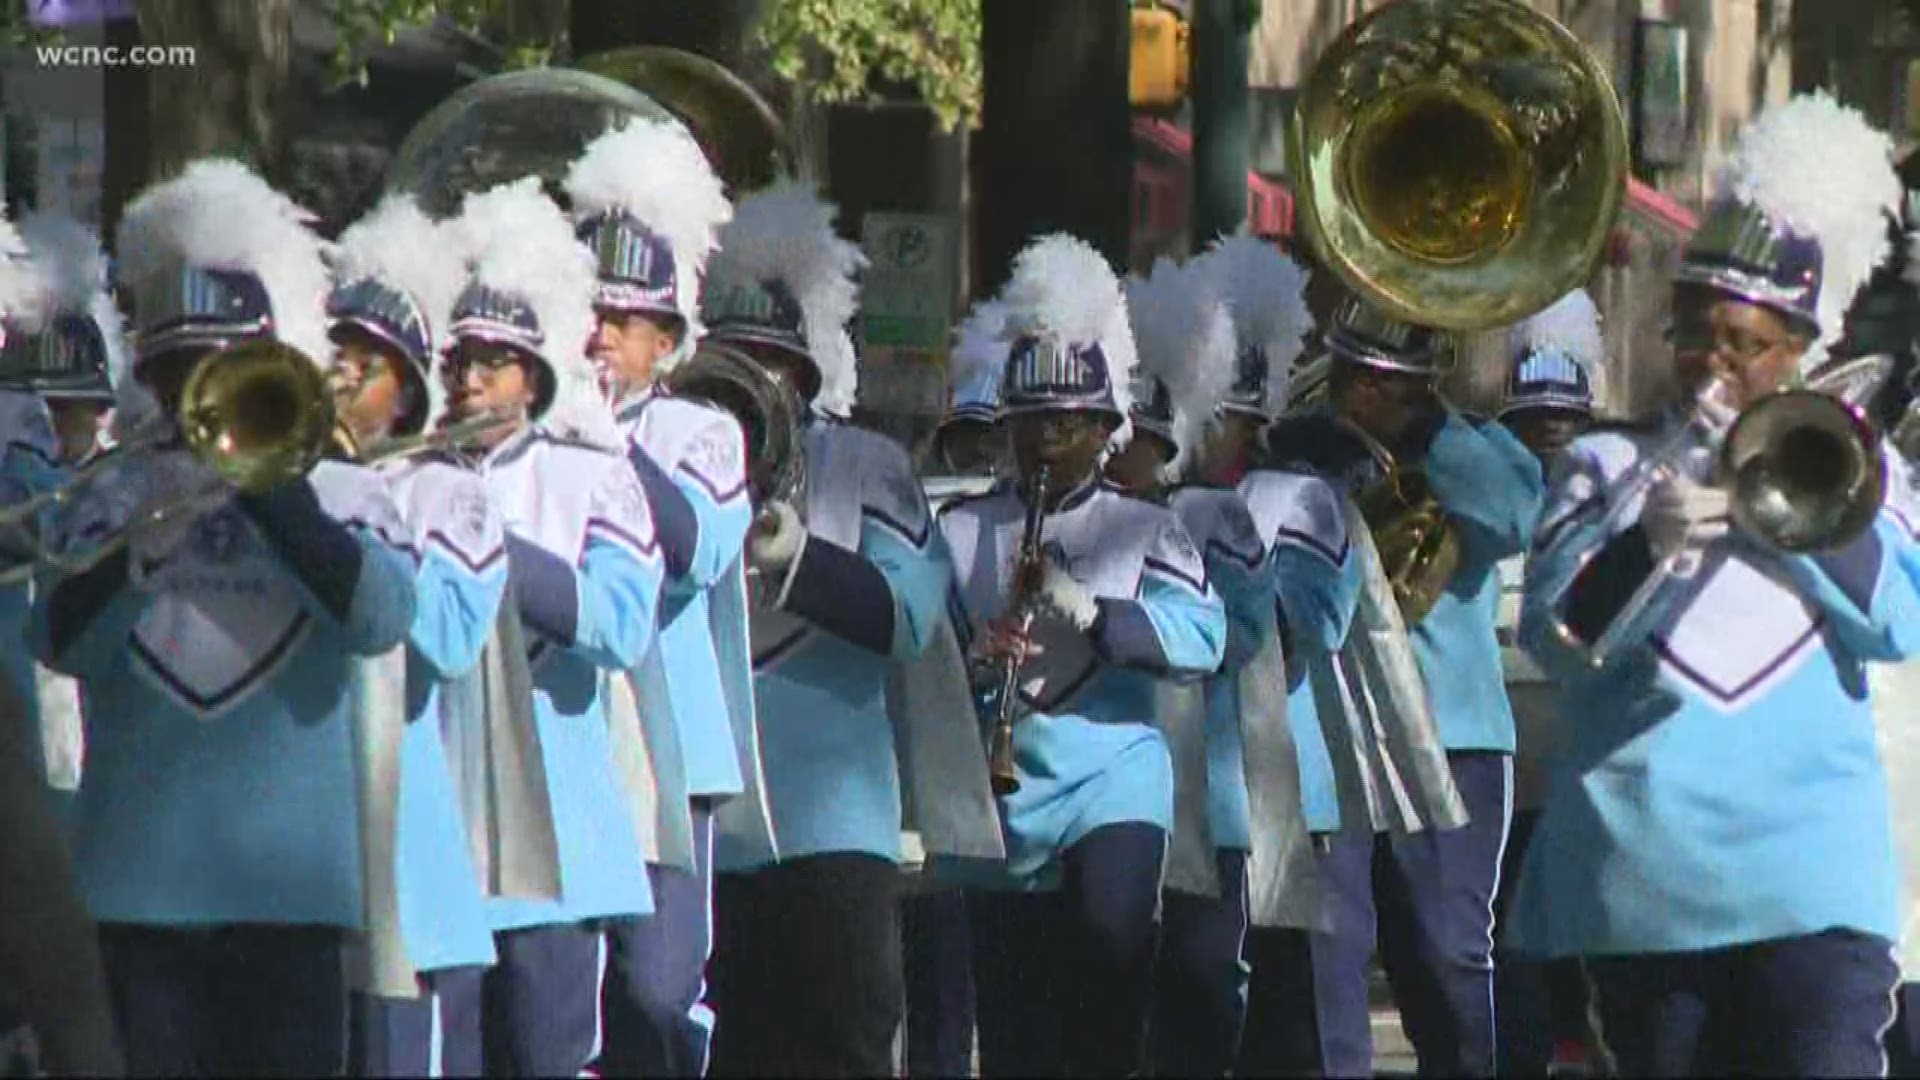 Ahead of Veterans Day, thousands of people took part in an annual parade in uptown Charlotte.